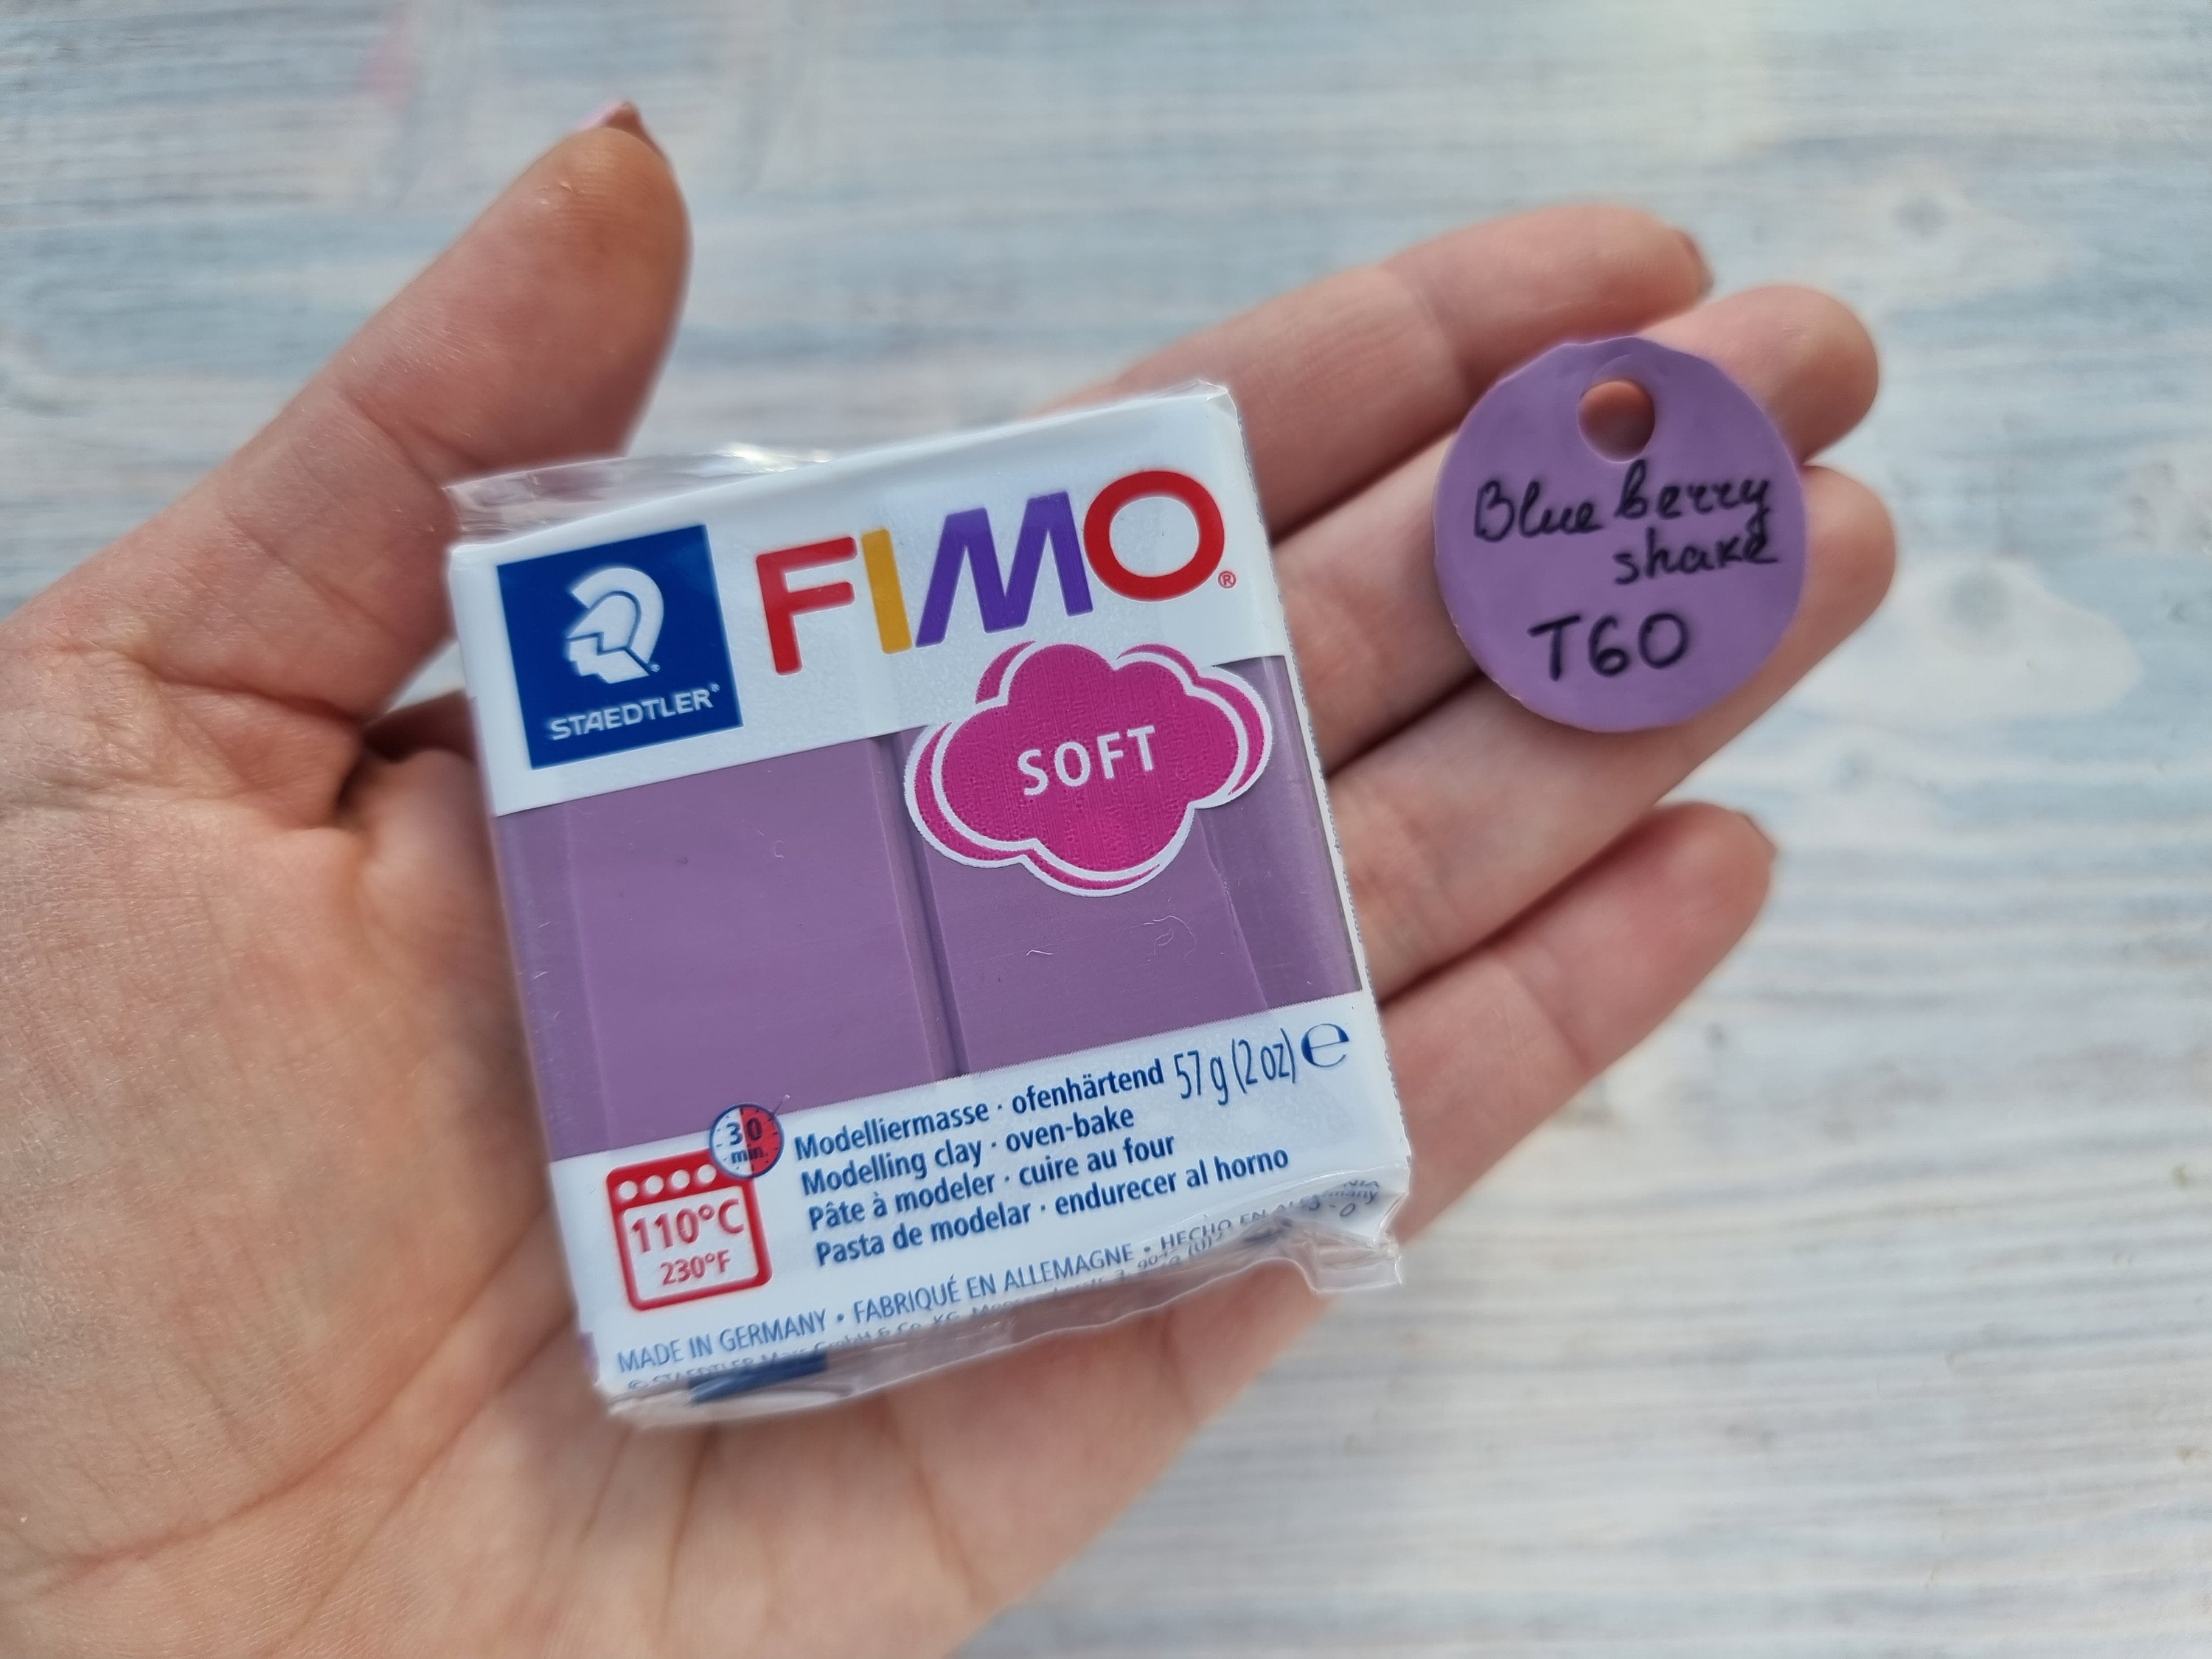 FIMO Soft Serie Polymer Clay, Emerald, Nr. 56, 57g 2oz, Oven